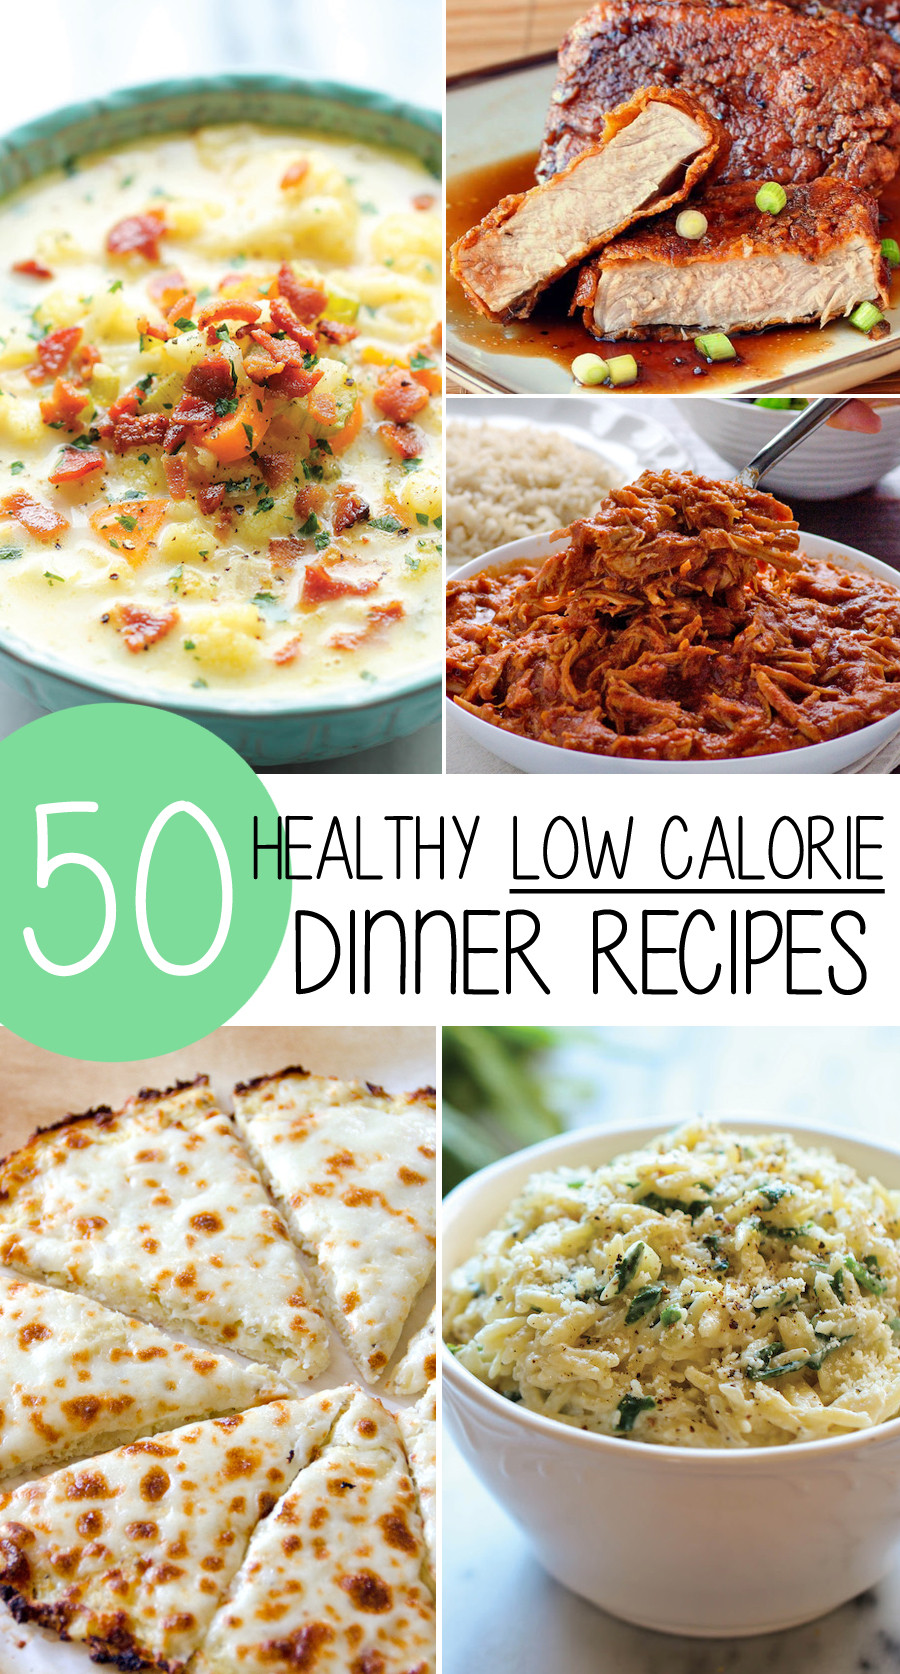 Weight Loss Dinner Recipes
 50 Healthy Low Calorie Weight Loss Dinner Recipes